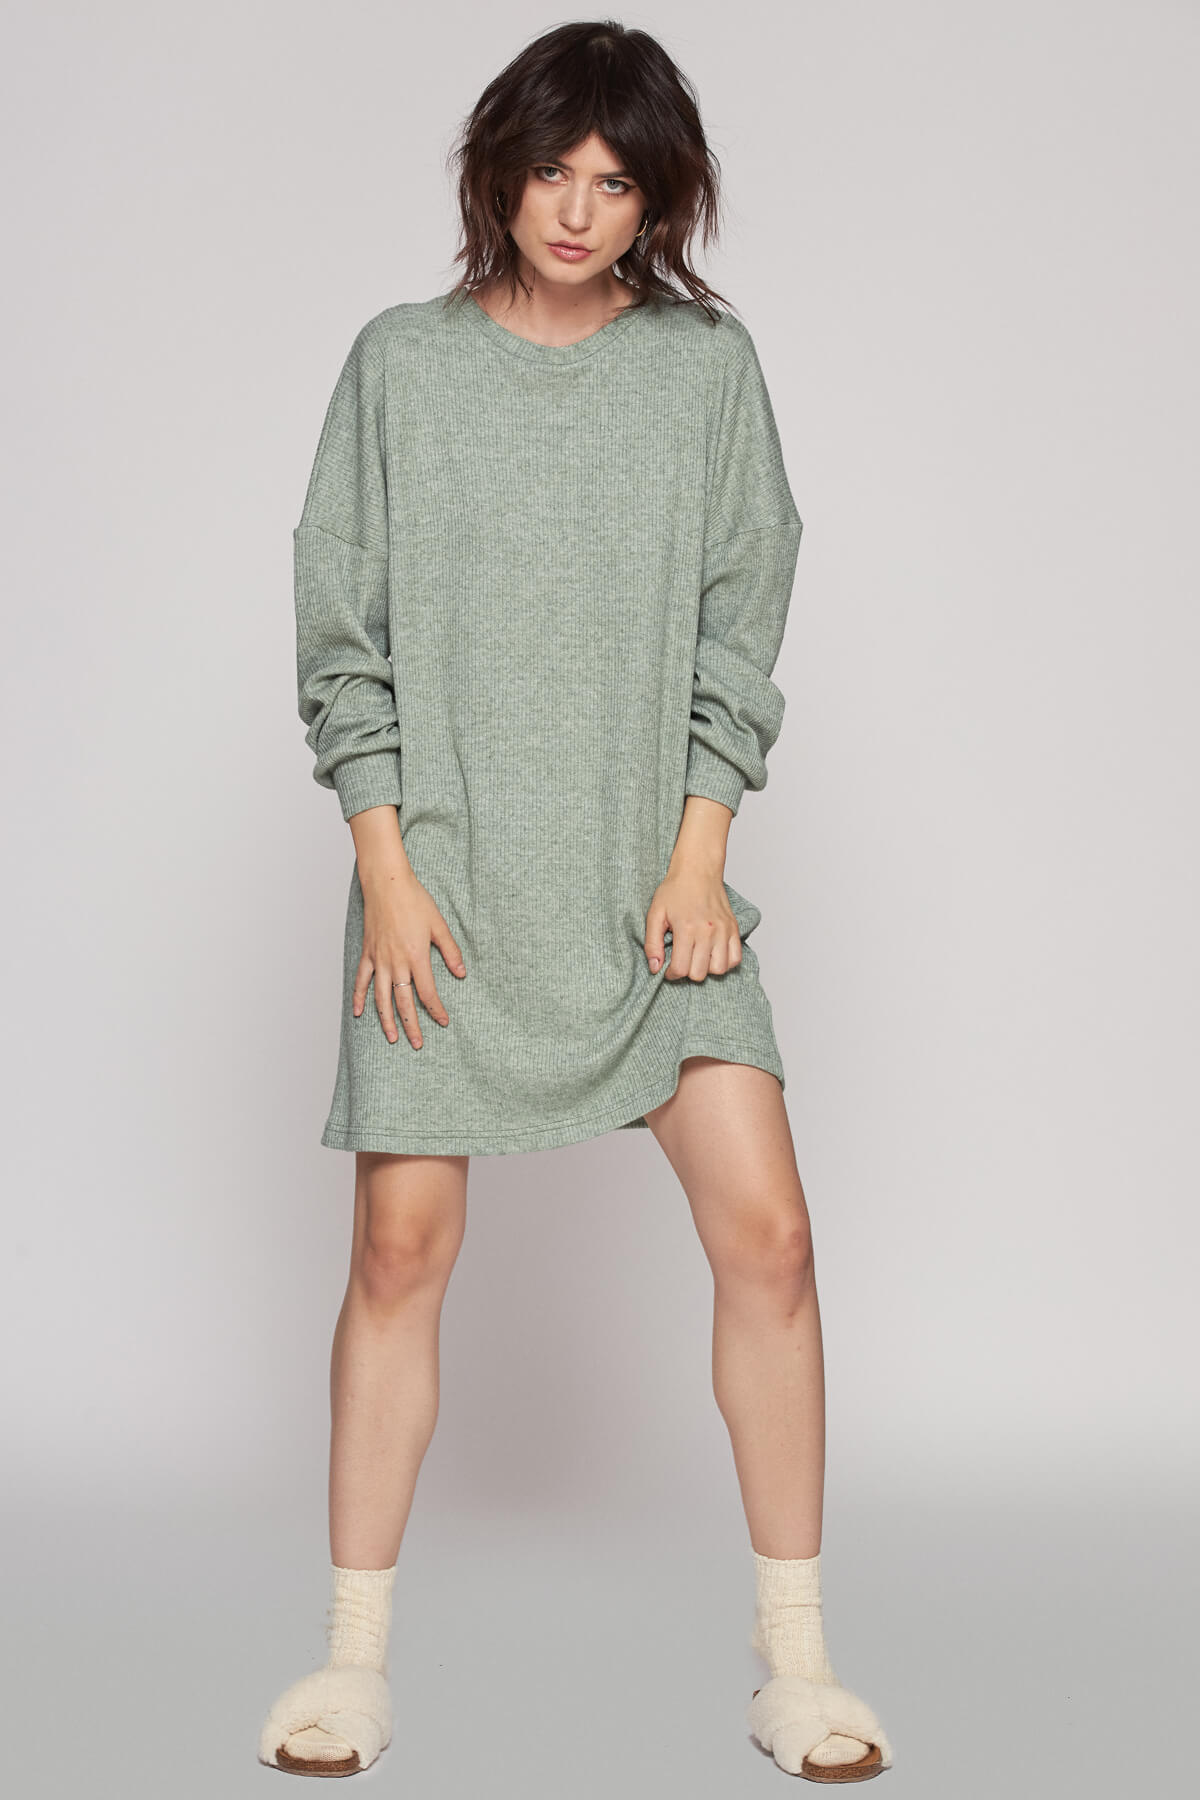 Oversized textured fabric dress for effortless, every day dressing